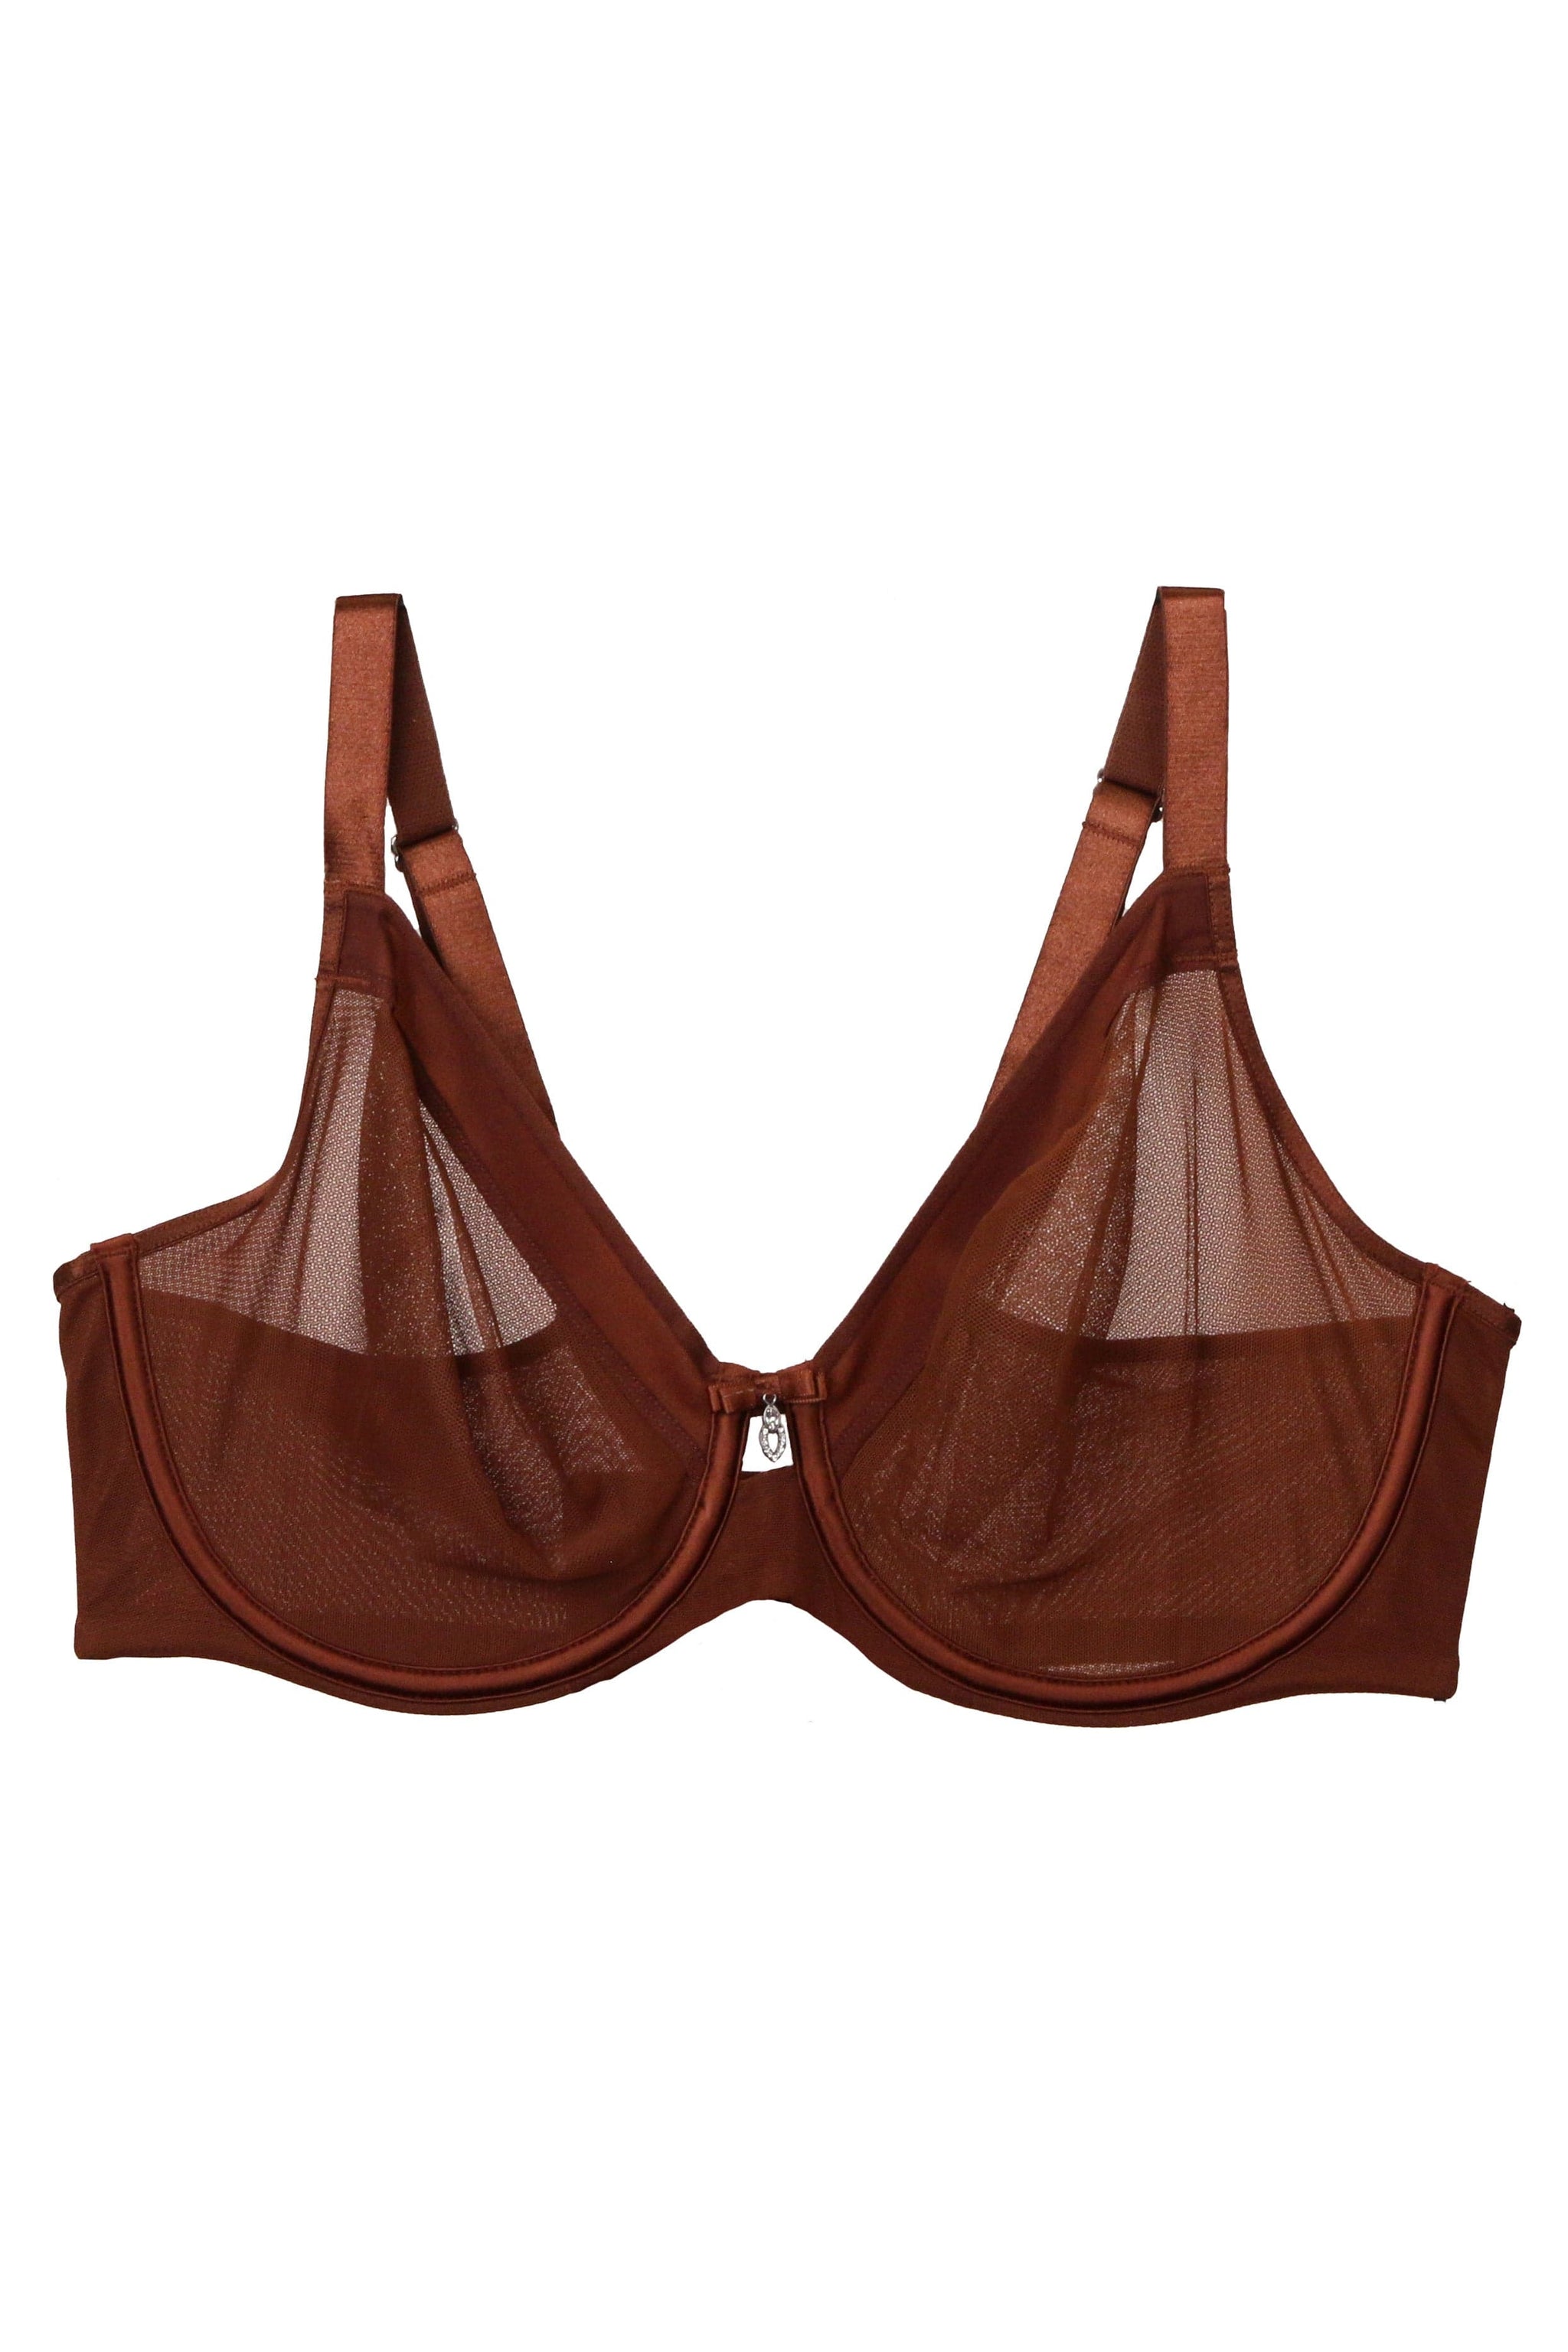 Curvy Couture Women's Solid Sheer Mesh Full Coverage Unlined Underwire Bra  Chocolate 38c : Target